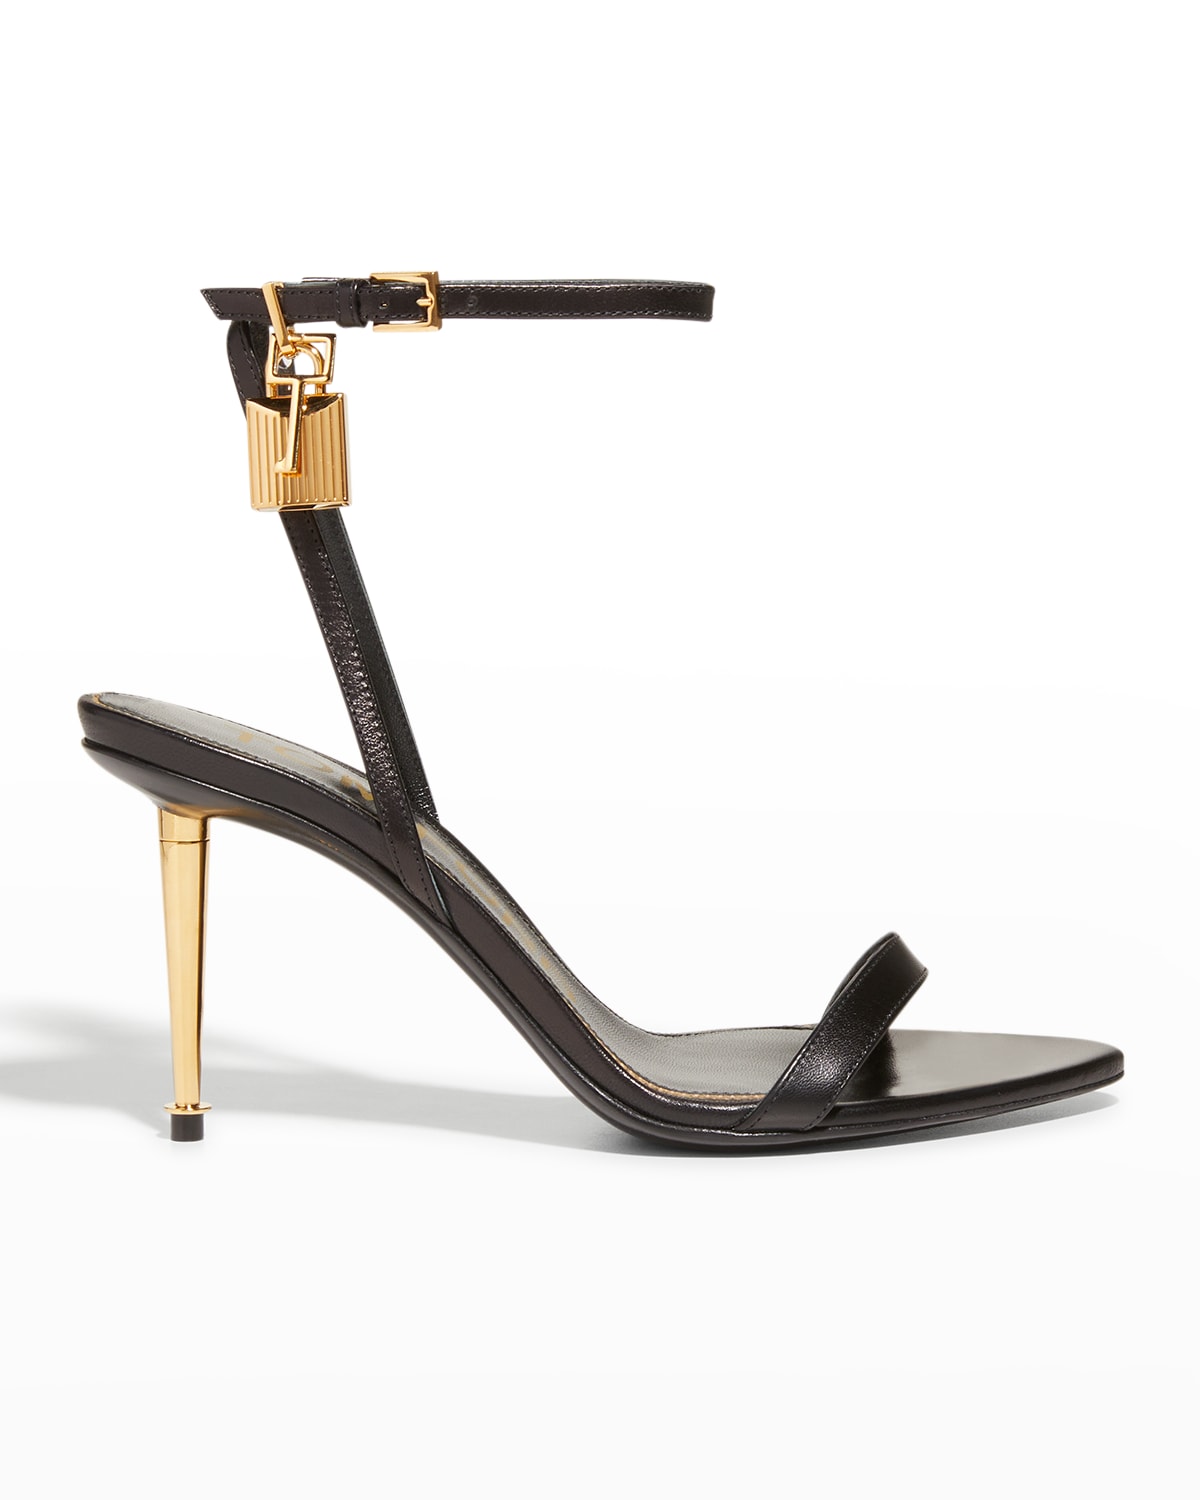 TOM FORD 85mm Lock Leather Sandals